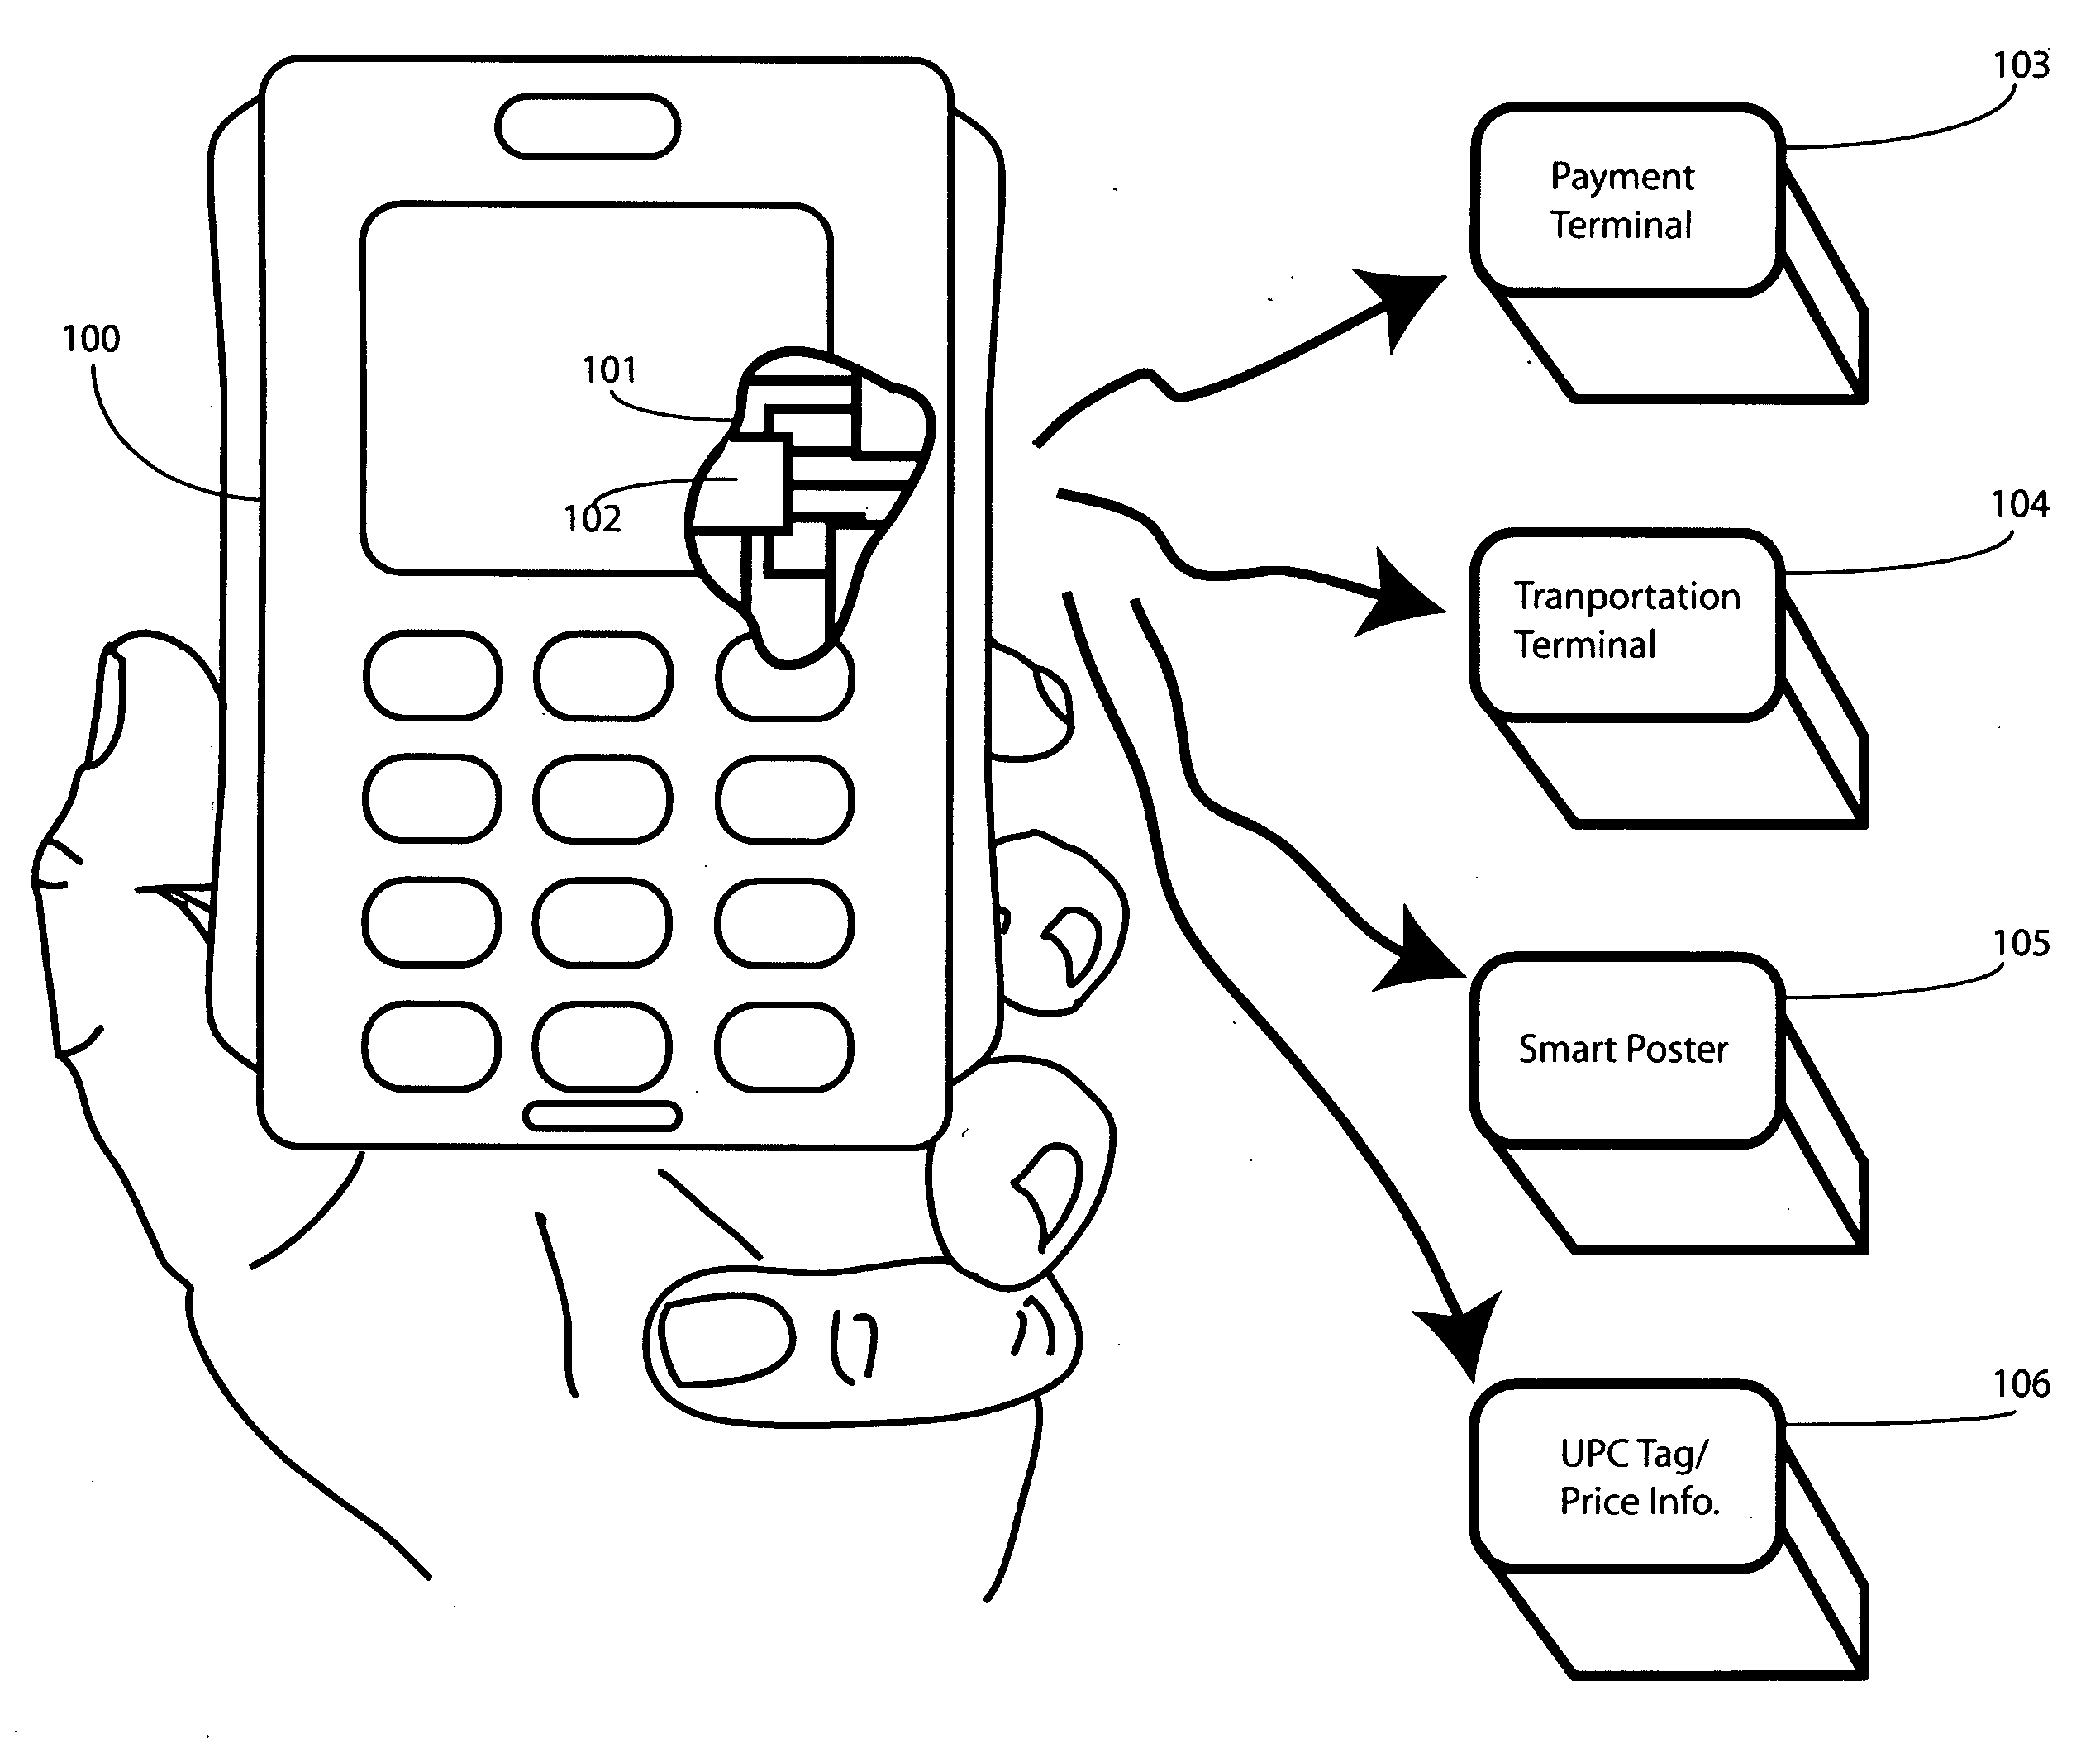 Method and Apparatus for Automatic Near Field Communication Application Selection in an Electronic Device